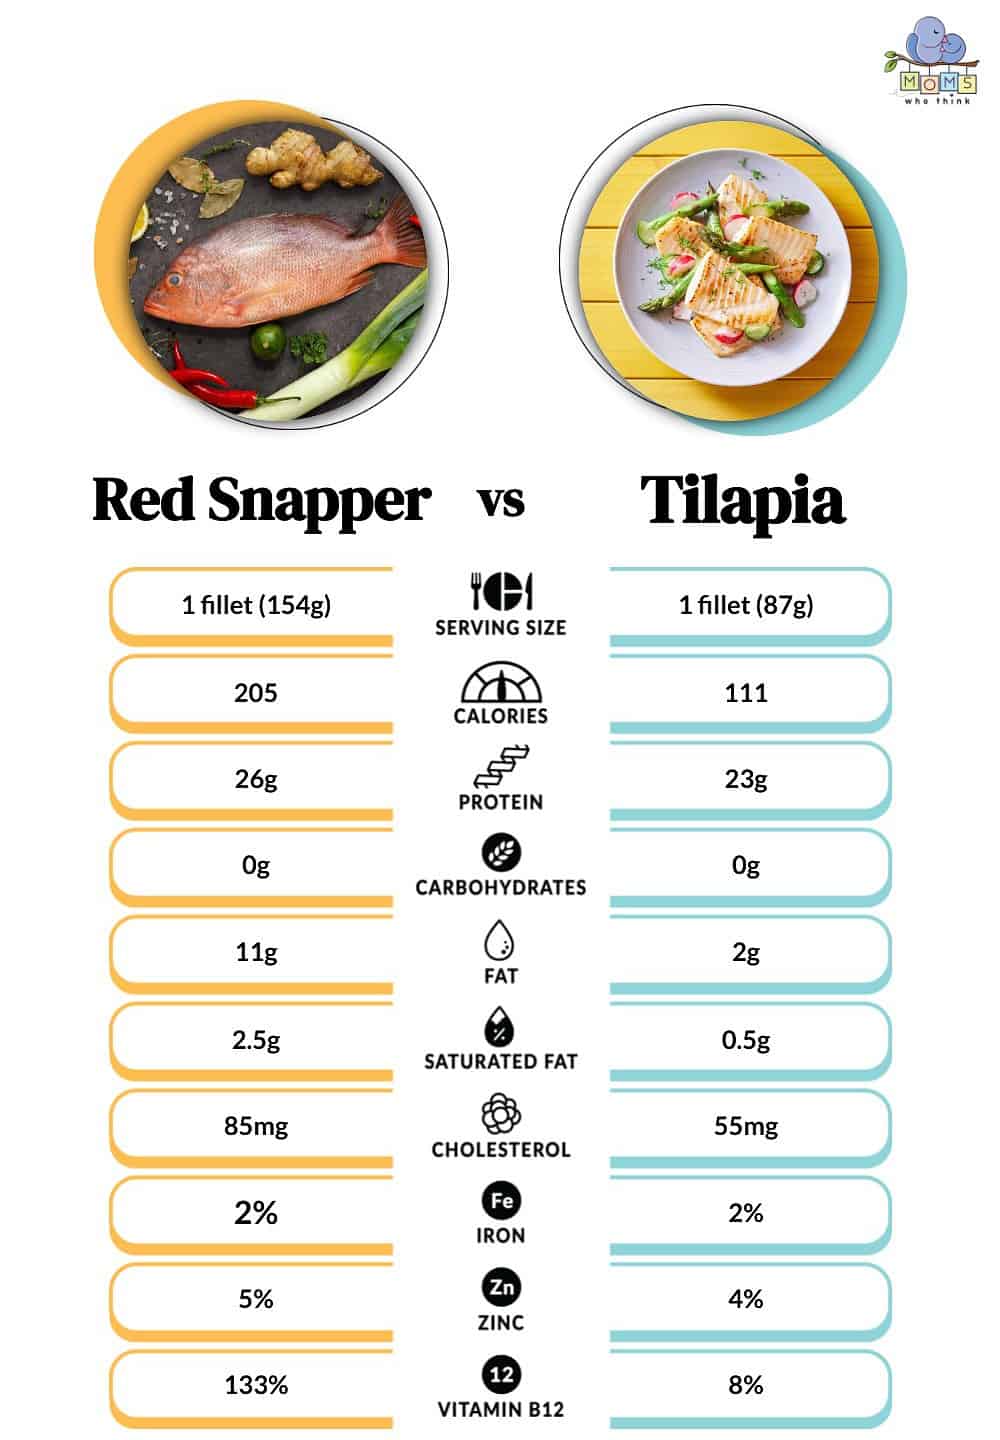 Red Snapper vs Tilapia Nutritional Facts